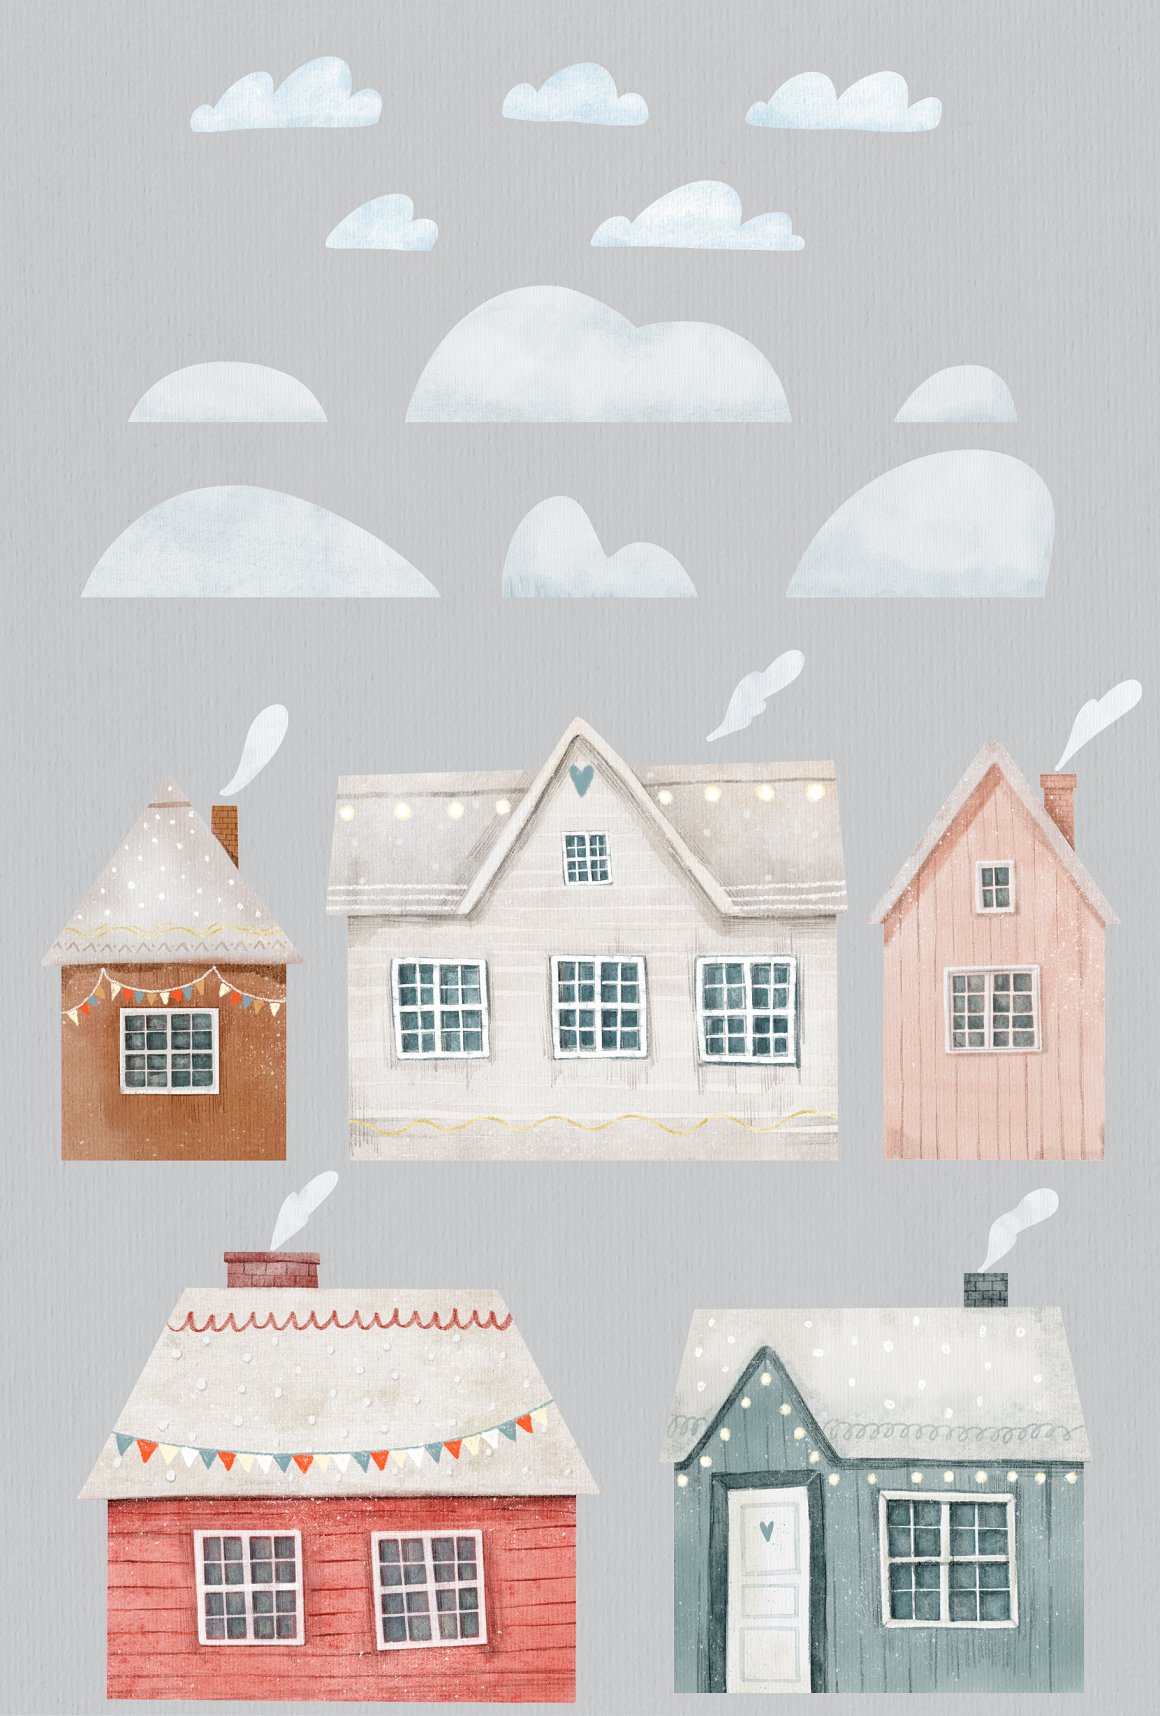 Watercolor set of different illustrations of houses and clouds.